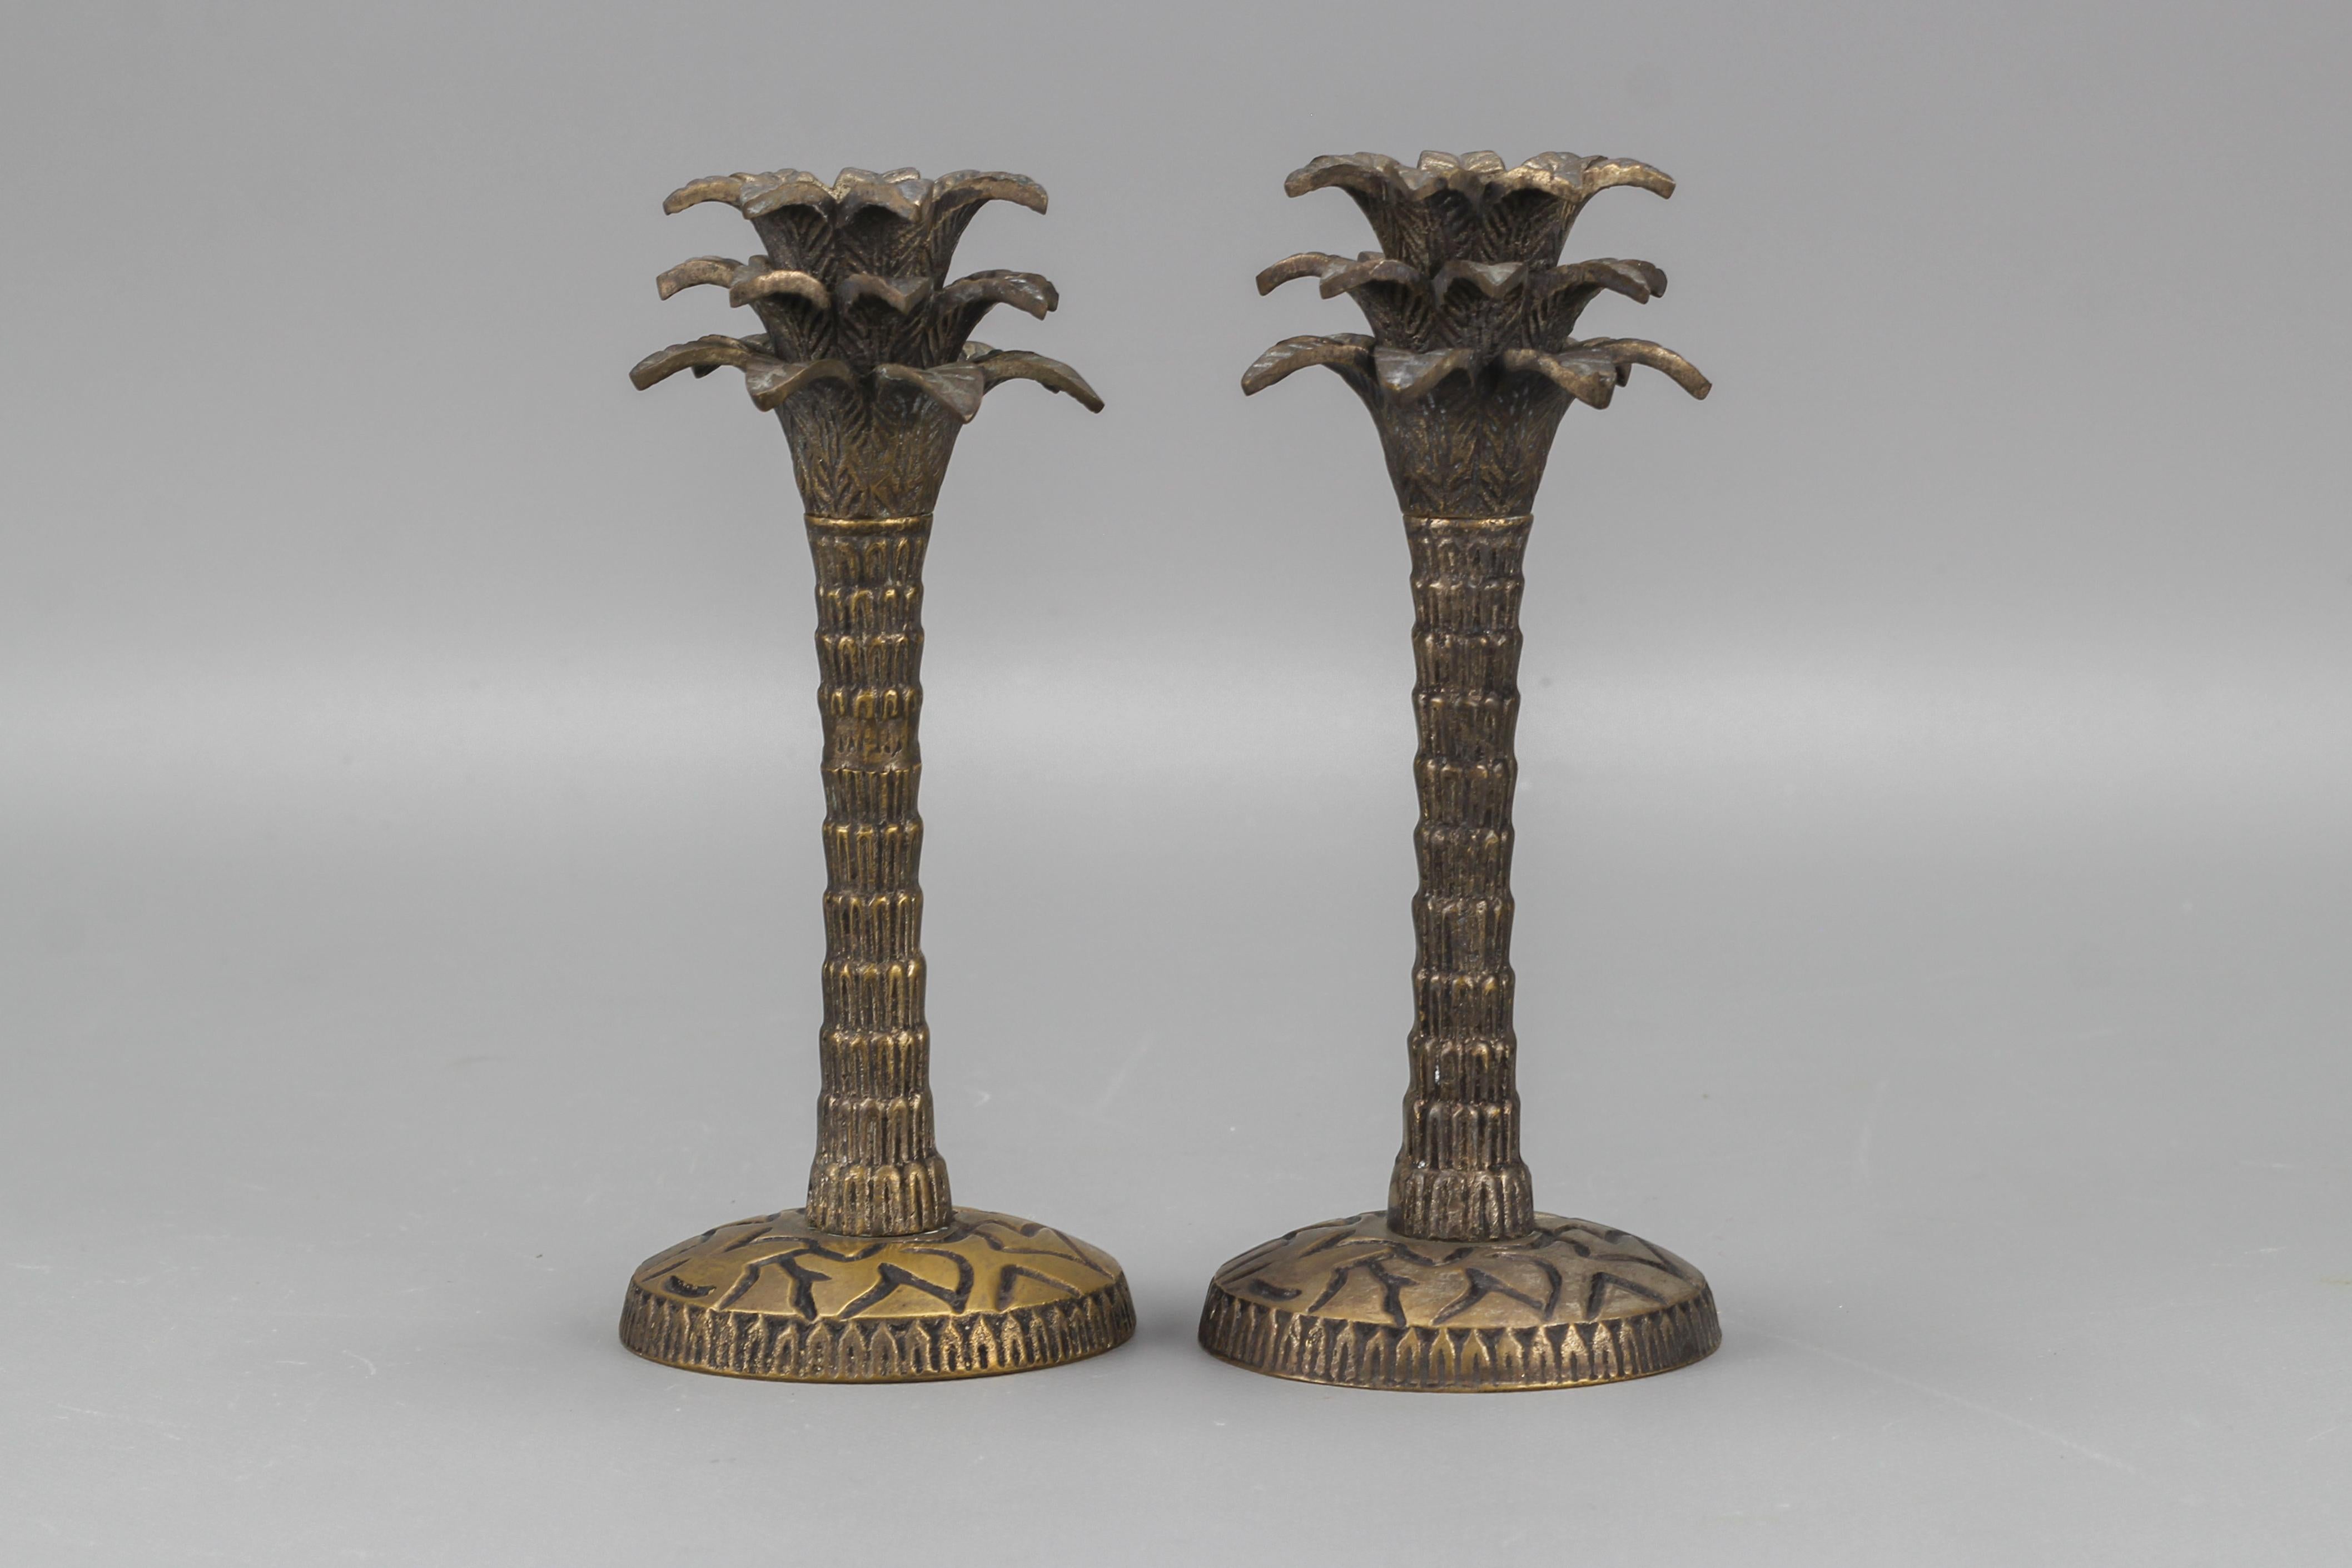 A pair of beautiful palm tree-shaped white bronze candle holders, France, circa the 1950s.
Dimensions: height: 17 cm / 6.7 in; diameter: 7.5 cm / 2.95 in.
In good, age-appropriate condition with some patina.